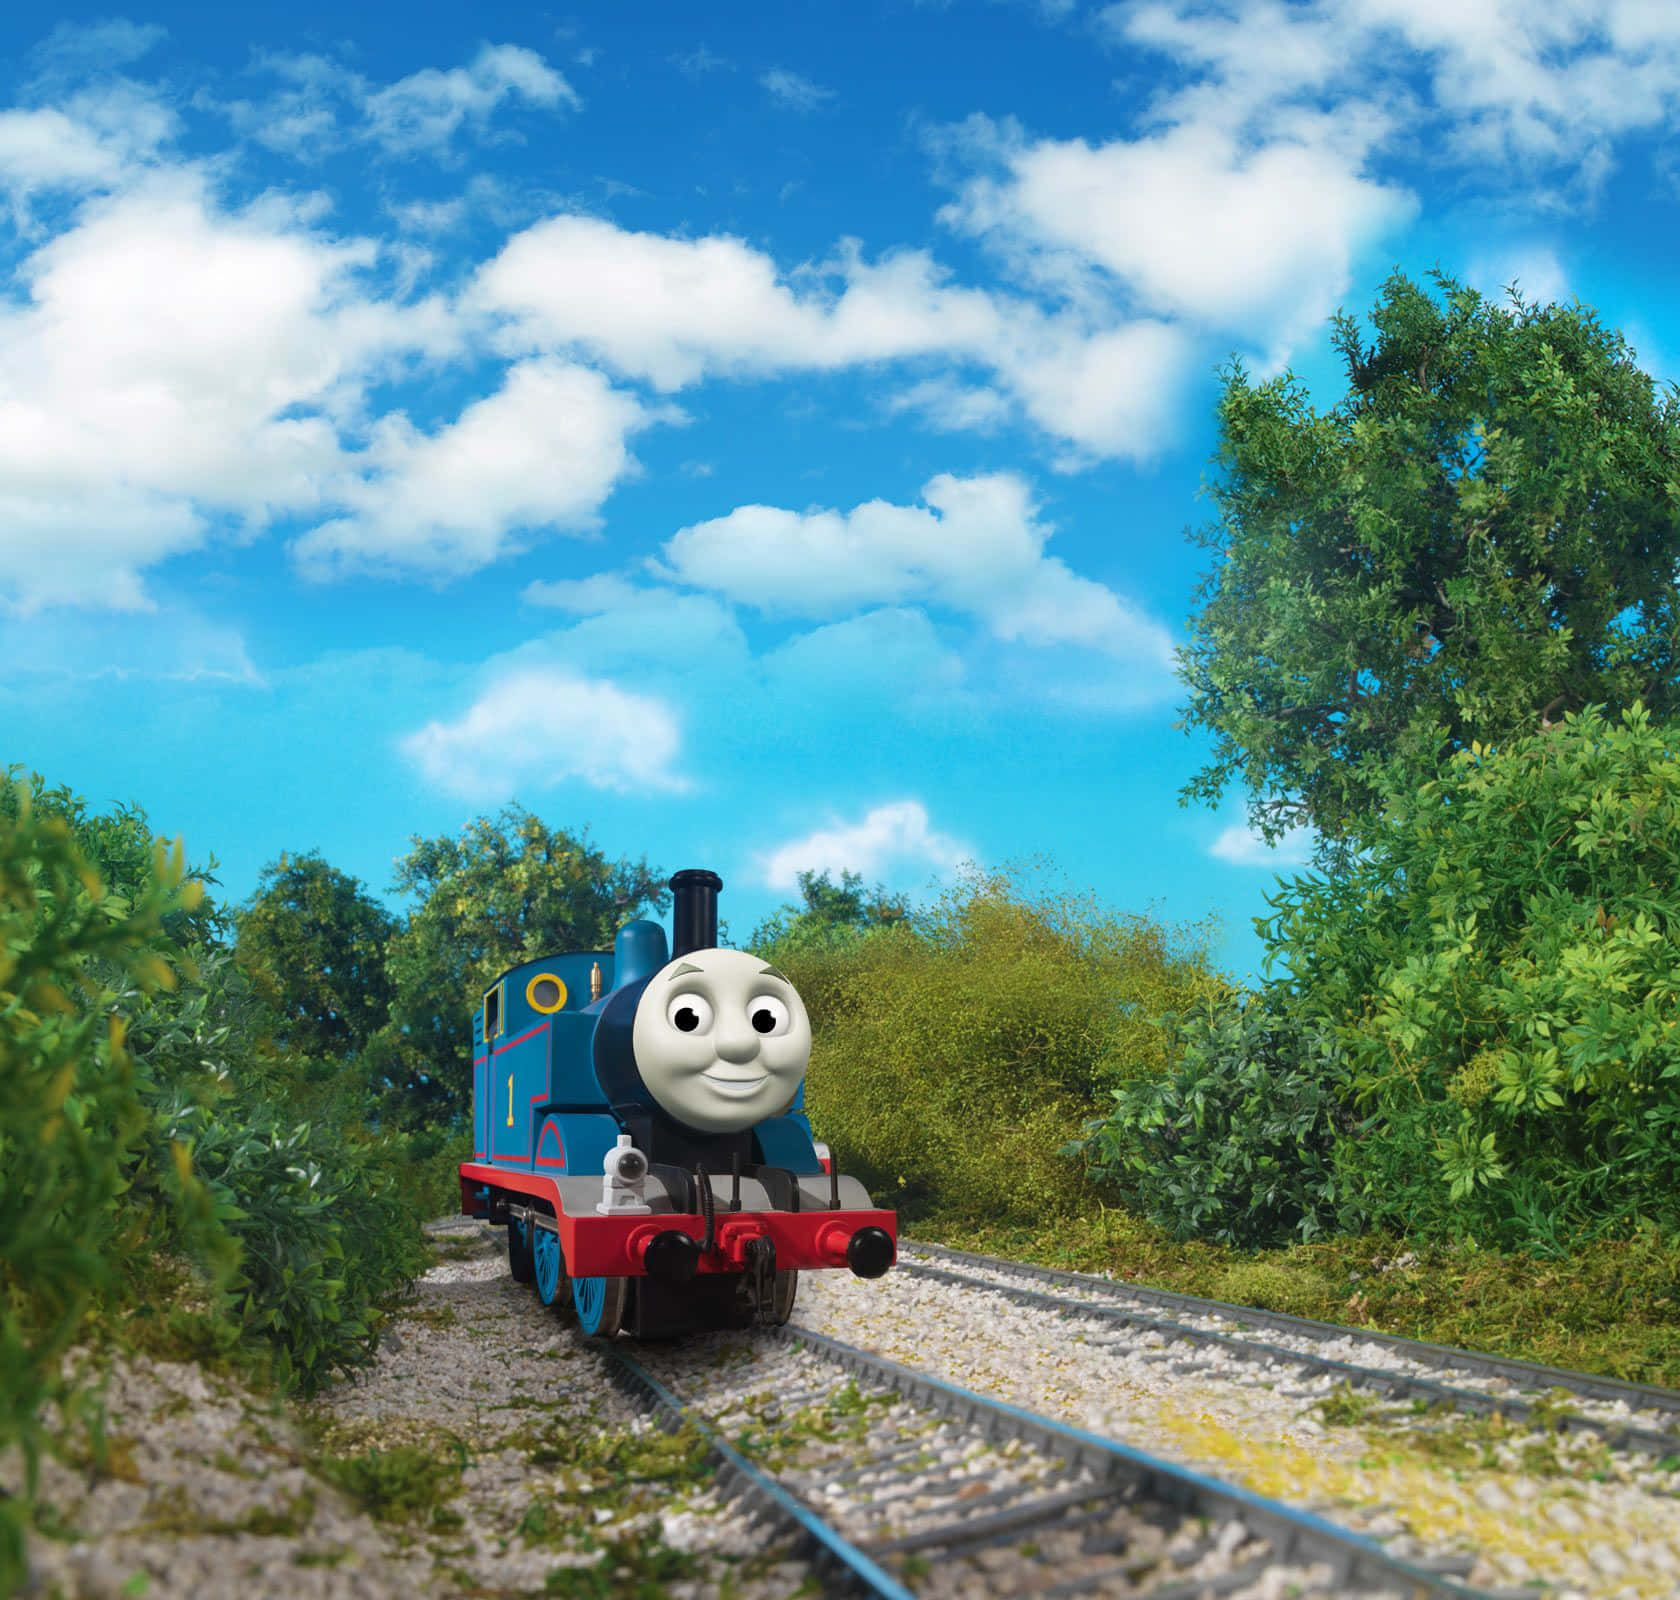 Thomas And Friends In Nature Wallpaper